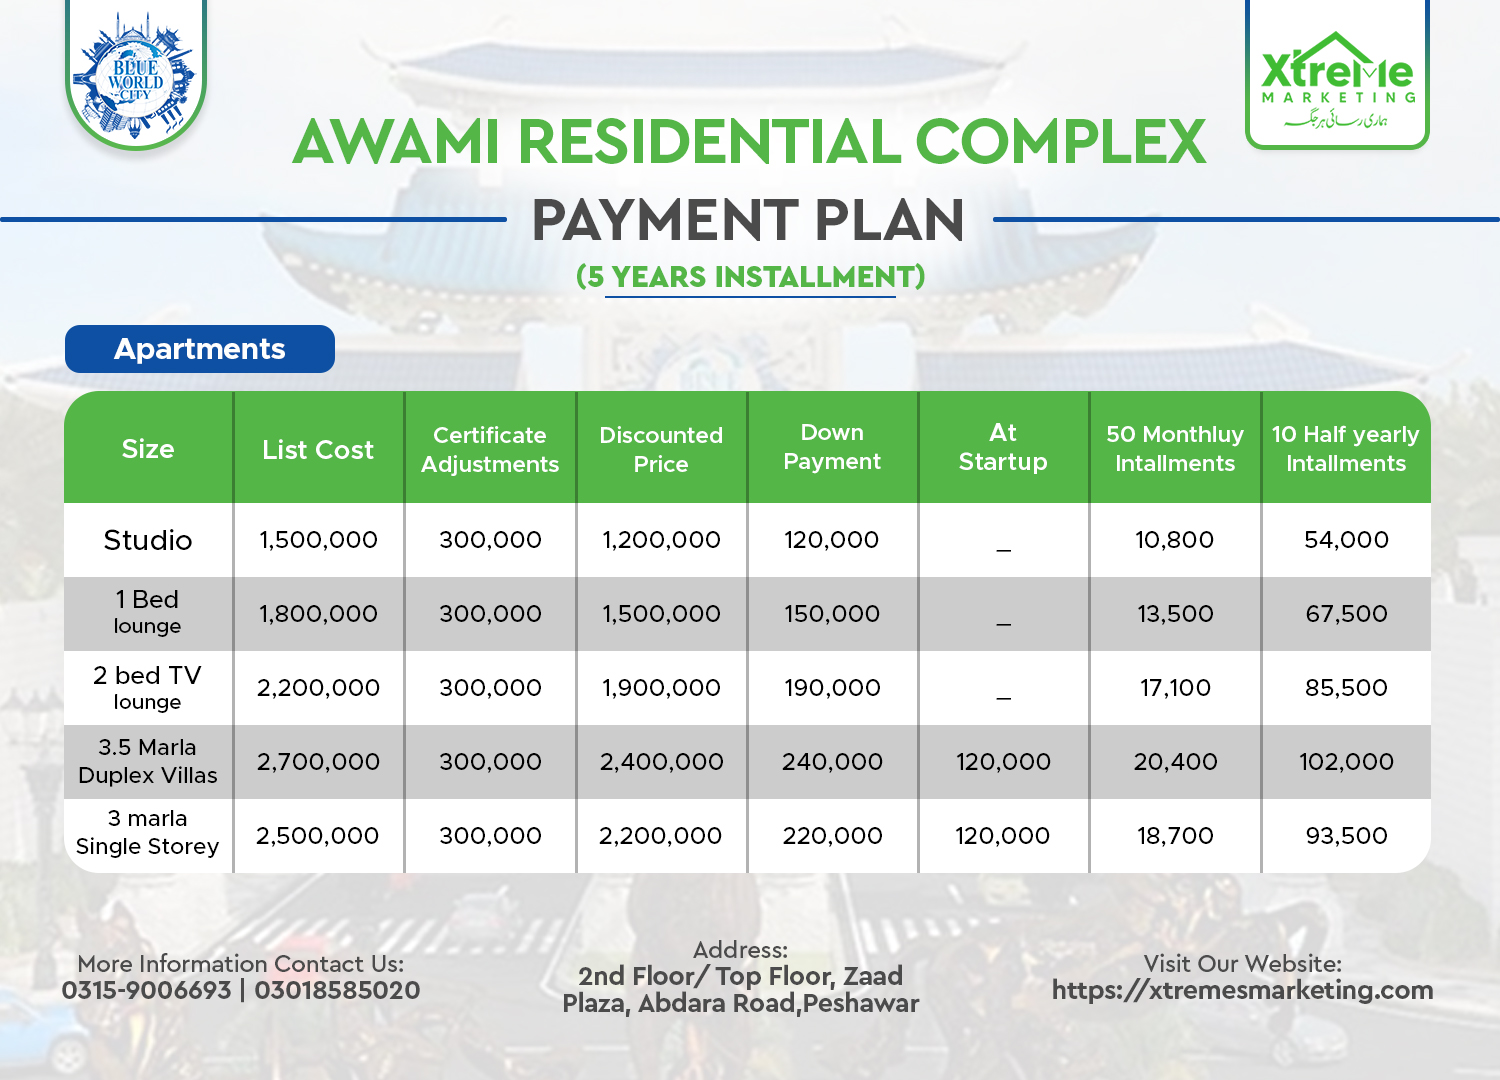 awami-residential-complex-apartmentsblue-world-city-payment-plan